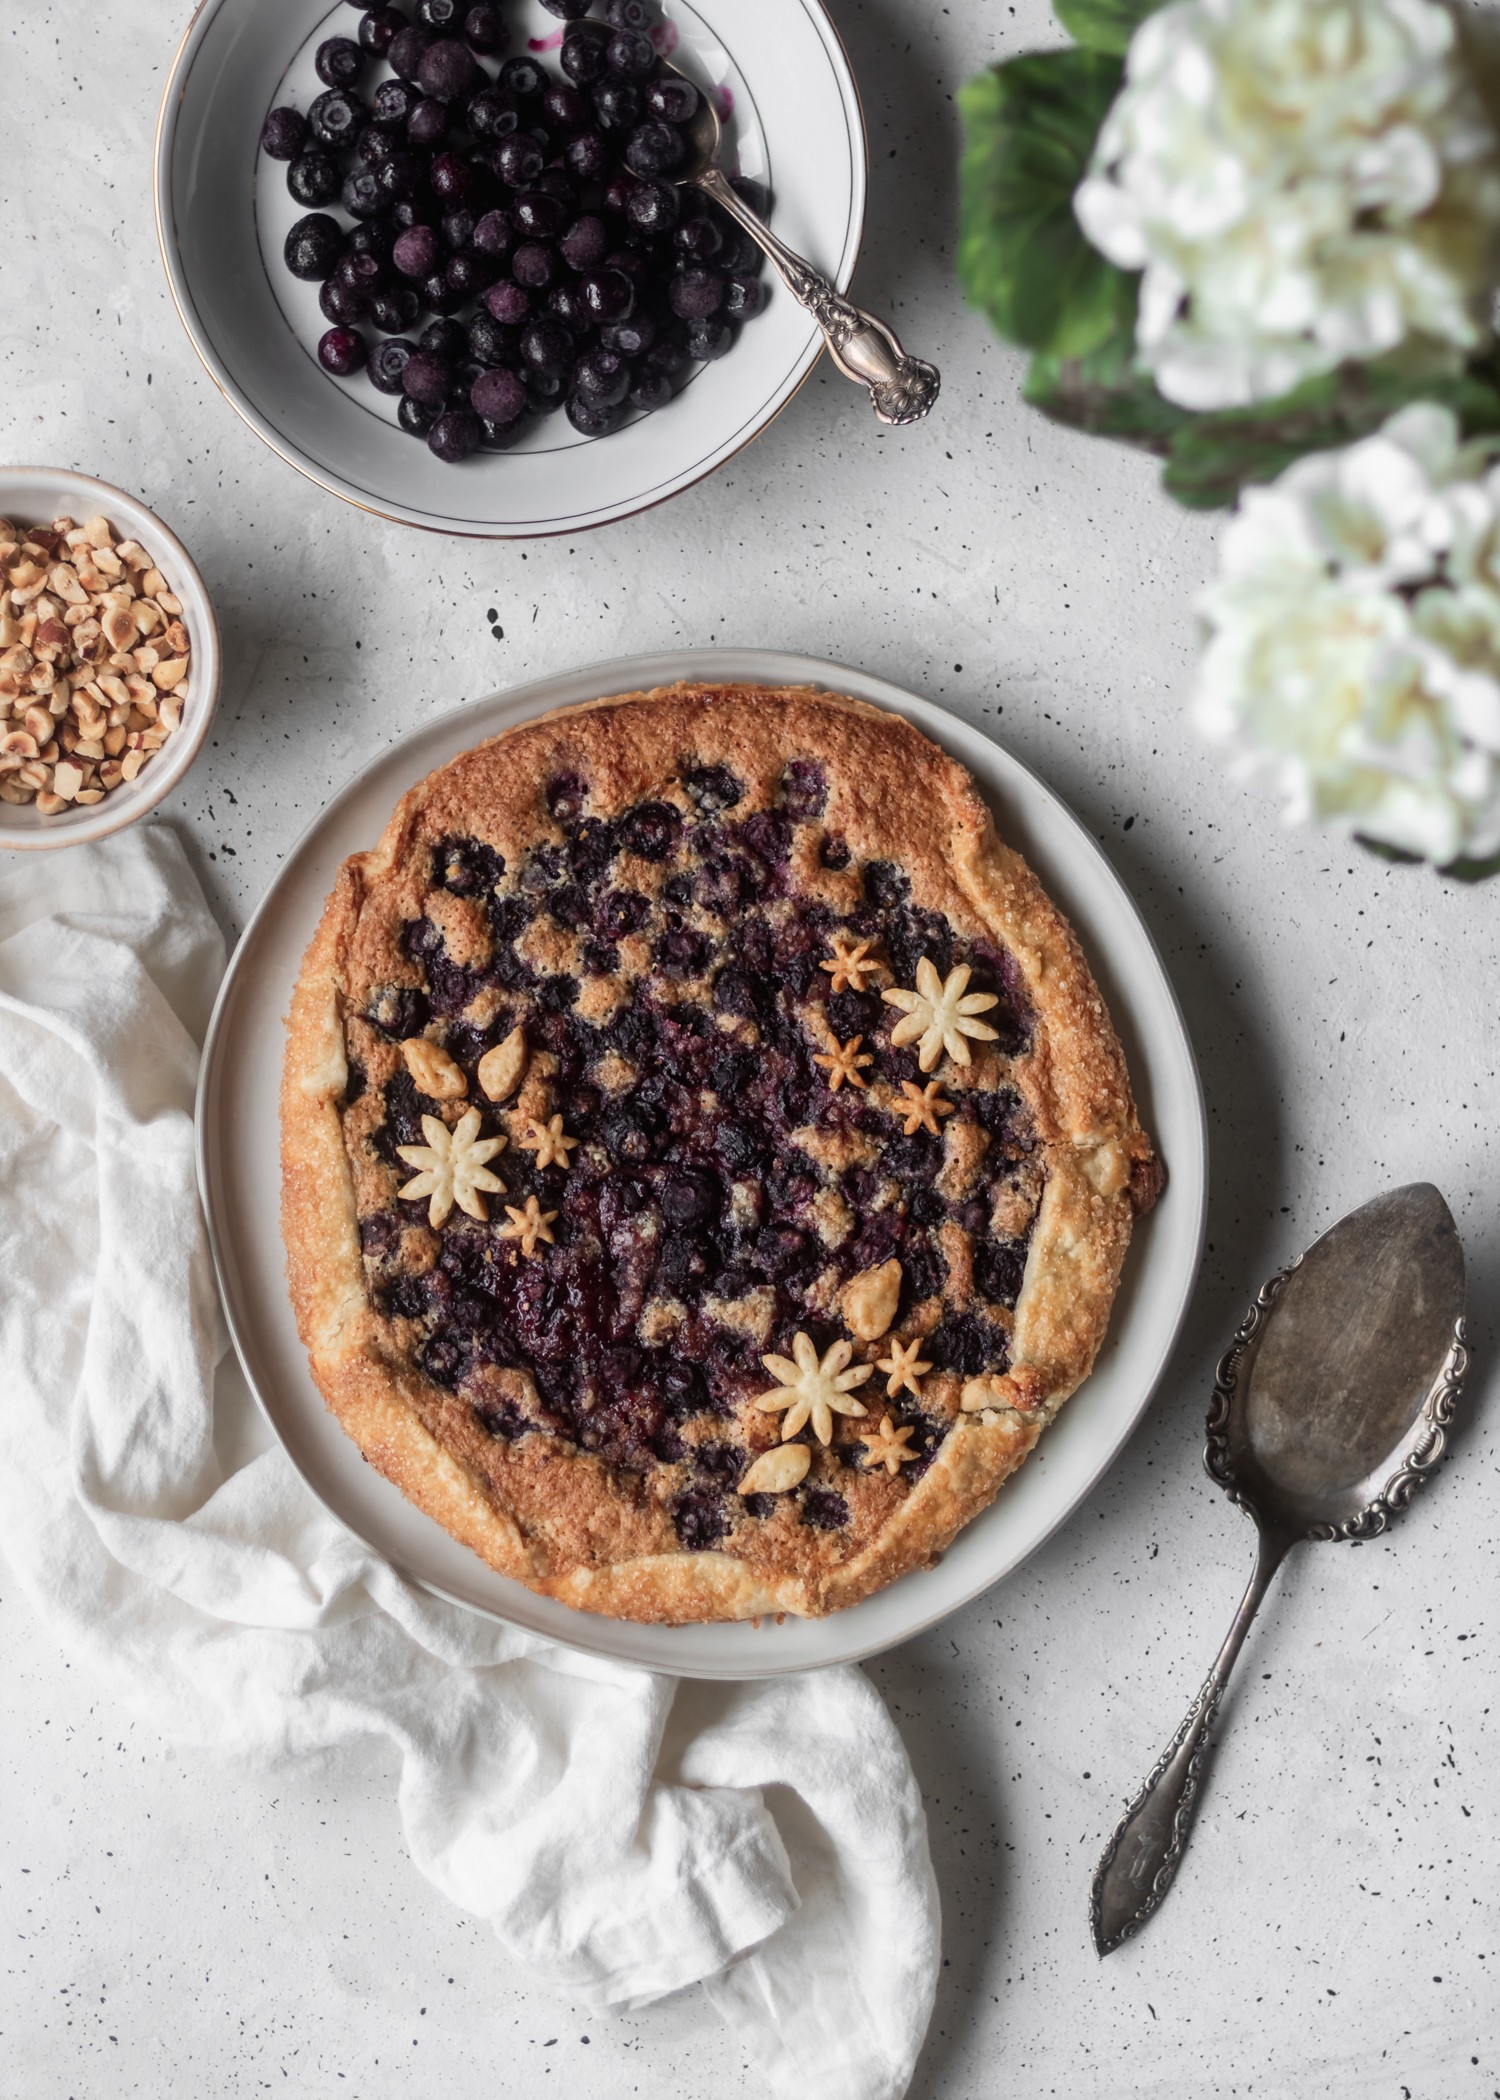 A bird's eye view of a blueberry crostata next to a bowl of blueberries, a bowl of hazelnuts, white hydrangeas, and a pie knife on a grey counter.